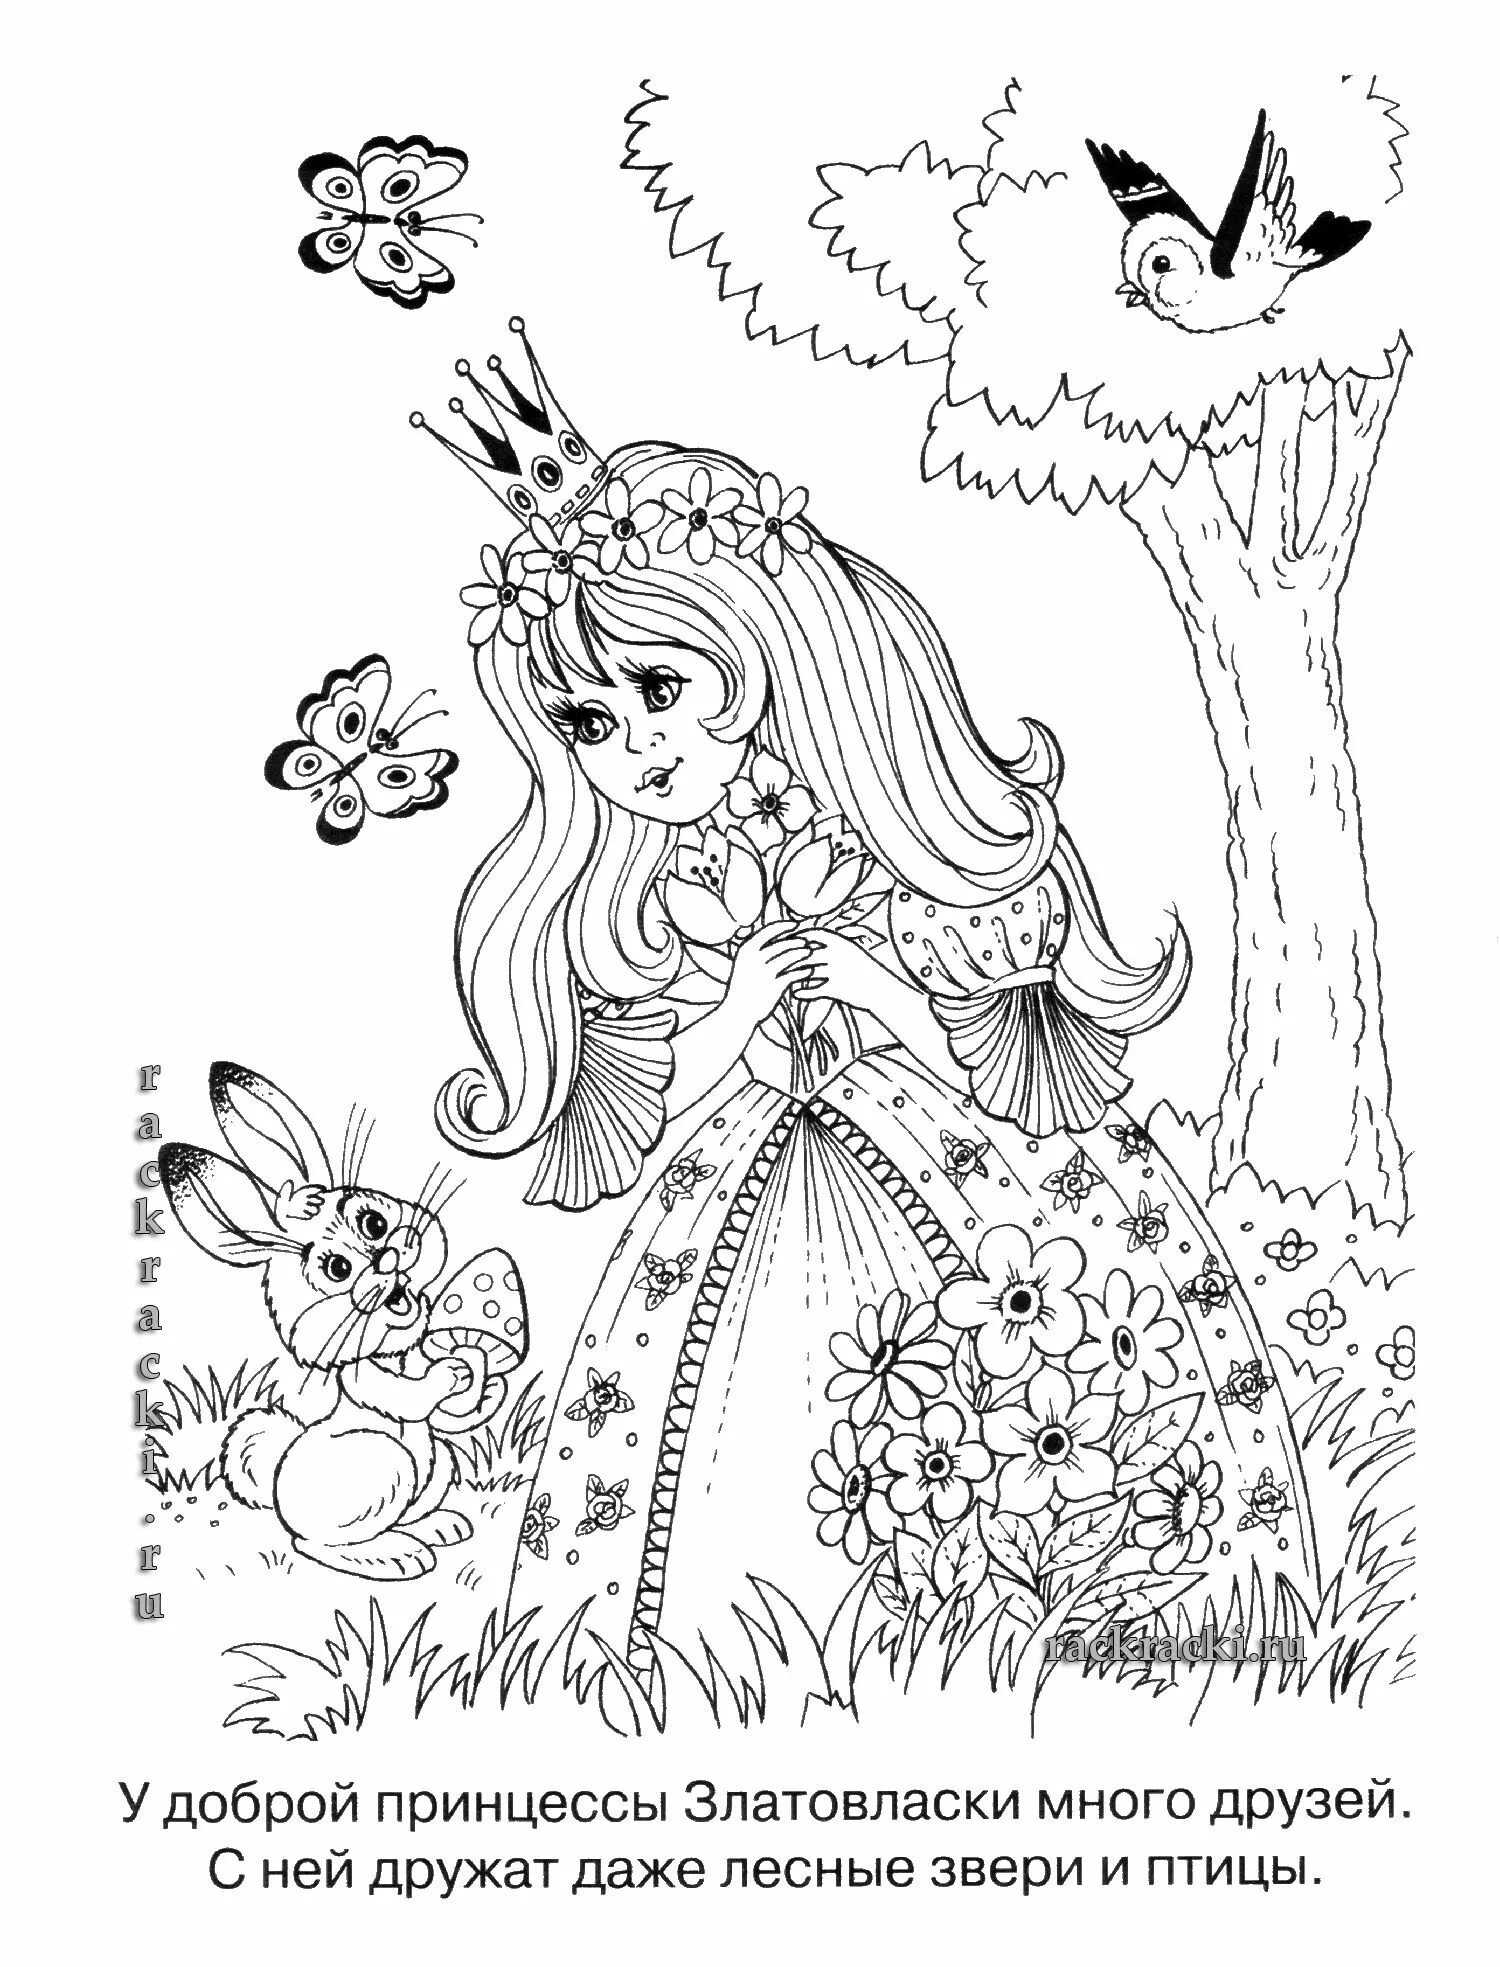 Royal fairy tale coloring pages for girls